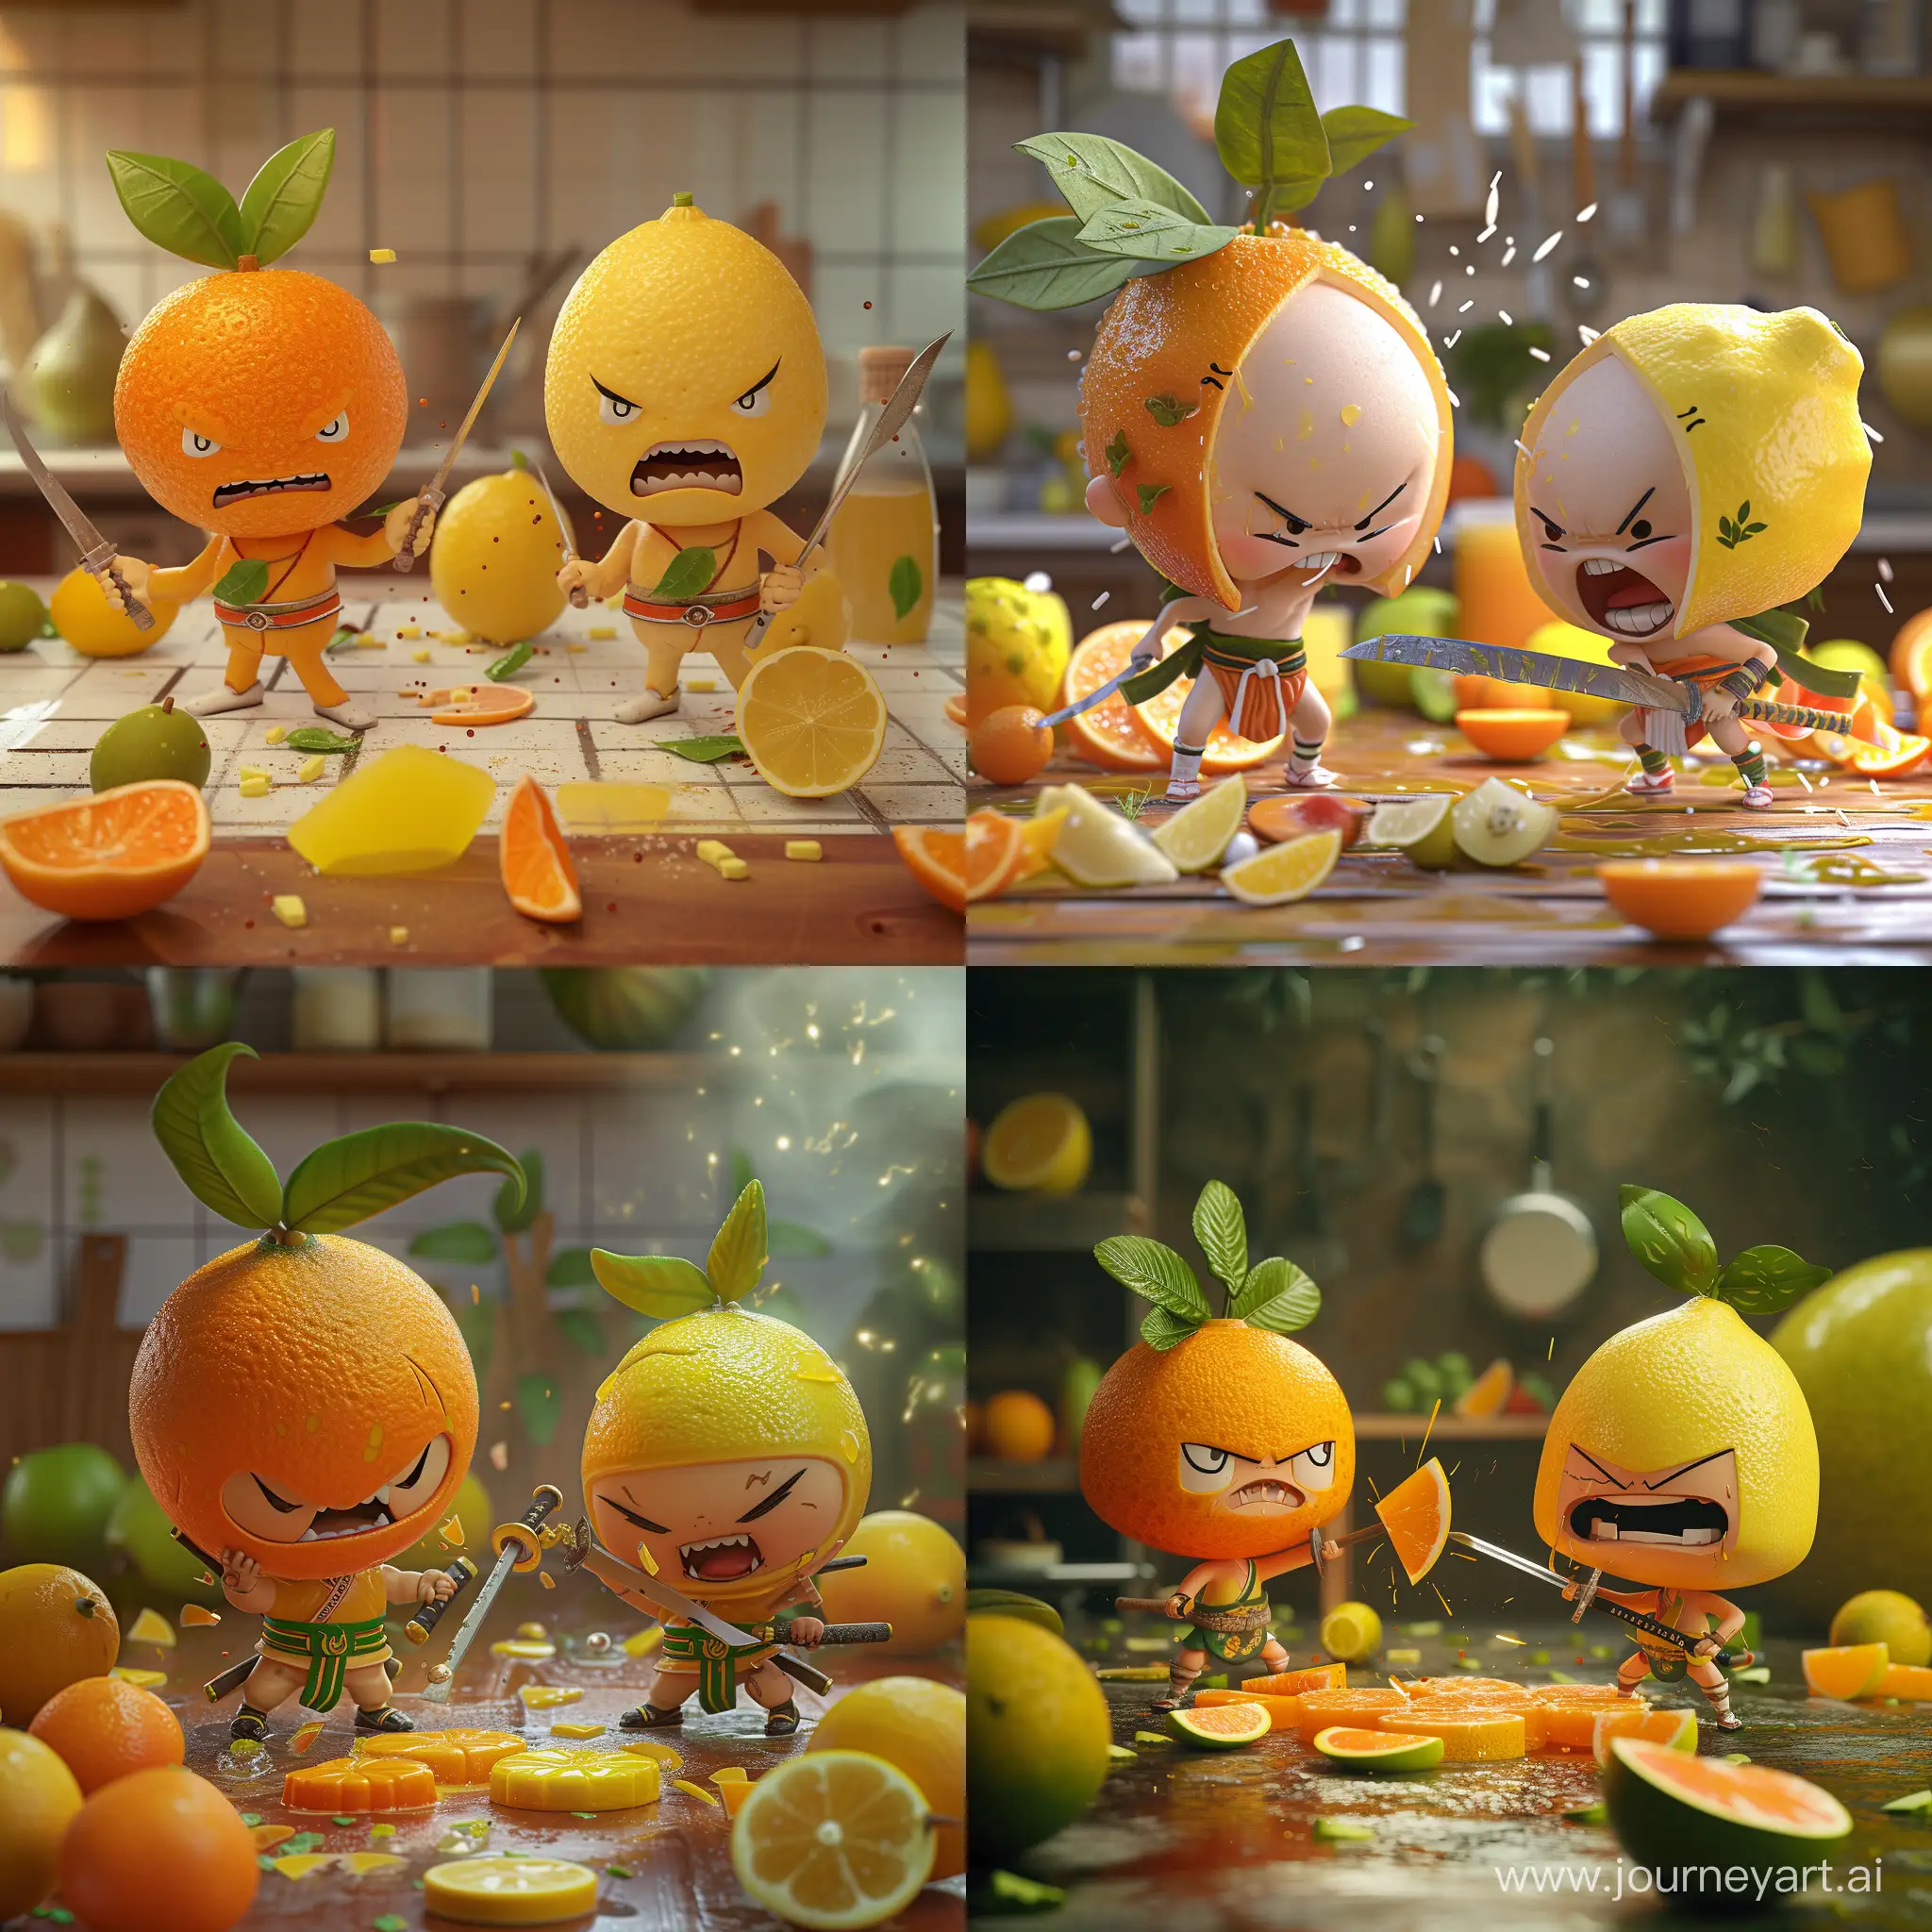 scene in a kitchen. a cute character with a big head shaped like an orange with leaves will fight another cute character with a big head shaped like a lemon with leaves. Both characters have very small bodies with very thin arms and very thin legs. They wear samurai belts and look angry. They hold a saber to attack each other. on the ground, there are large pieces of fruit (orange, apple, lemon, etc.) and fruit juice. anime style, dramatic and dark atmosphere 3D